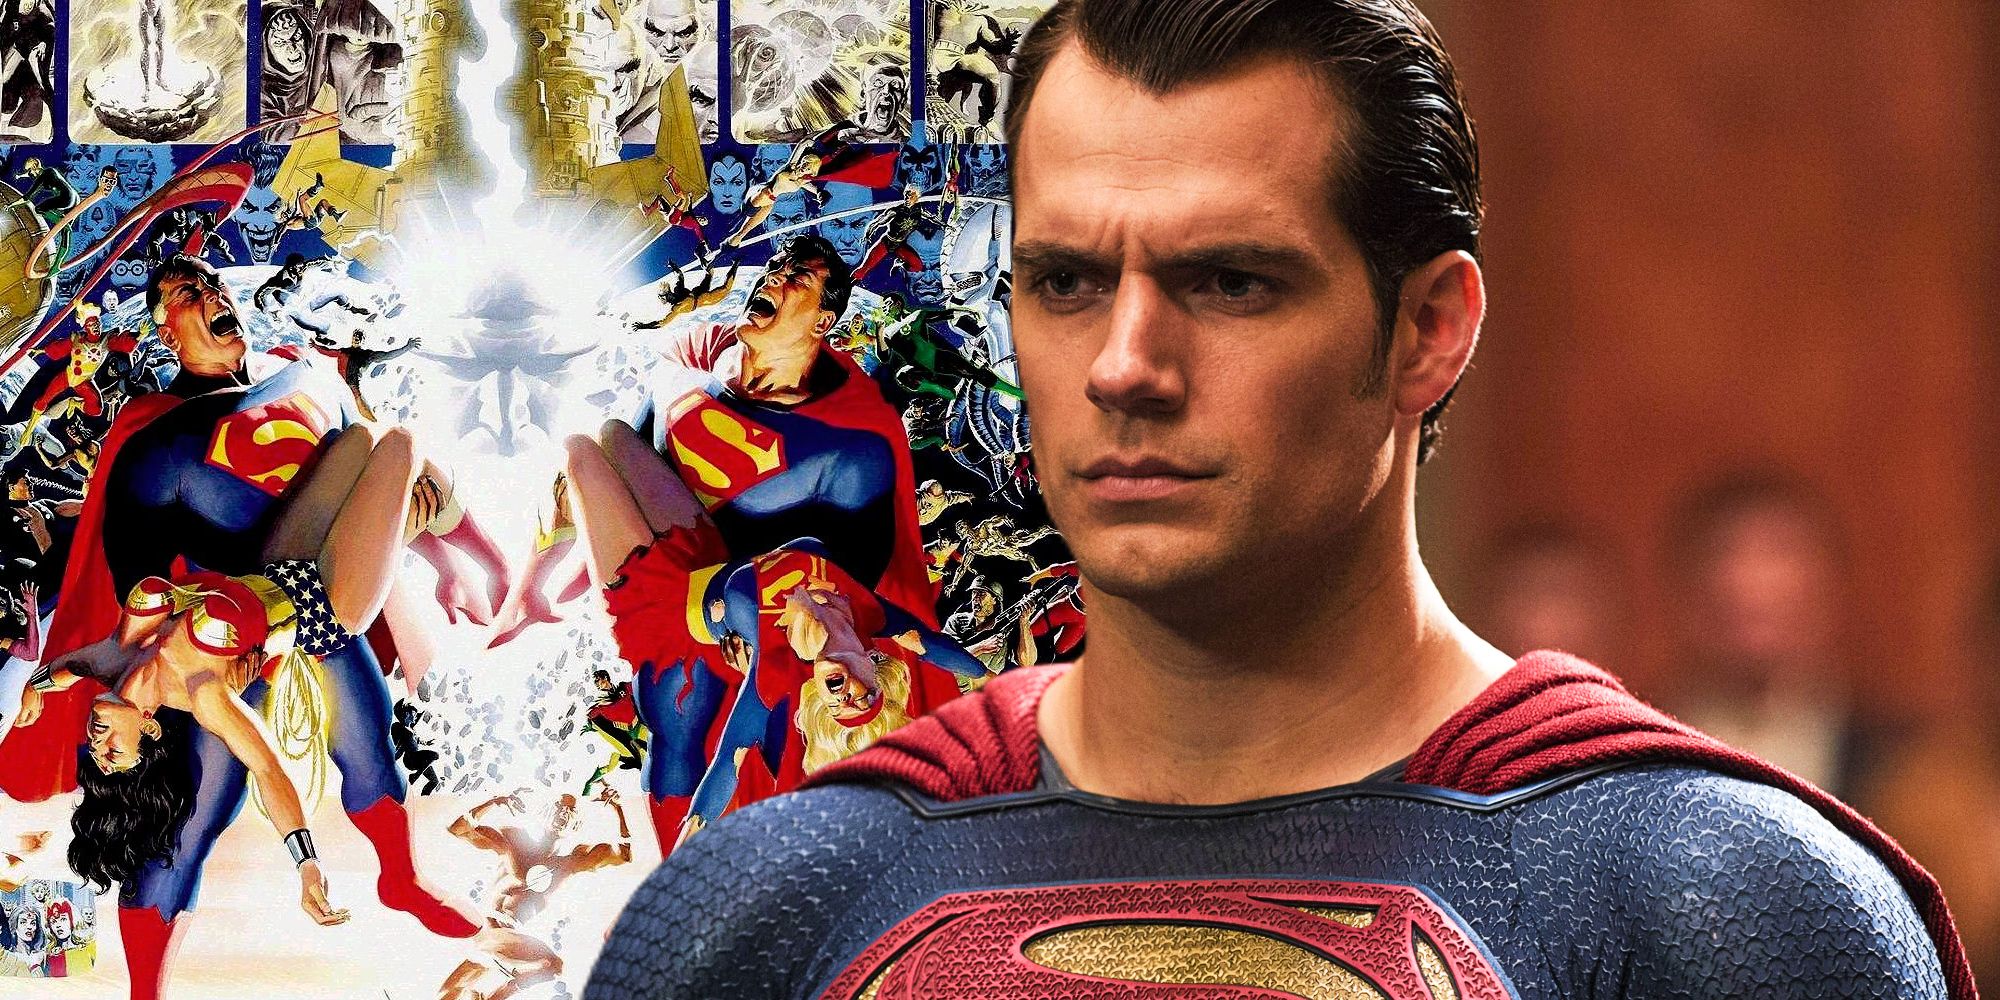 Crisis on Infinite Earths comic book panel and Henry Cavill as Superman